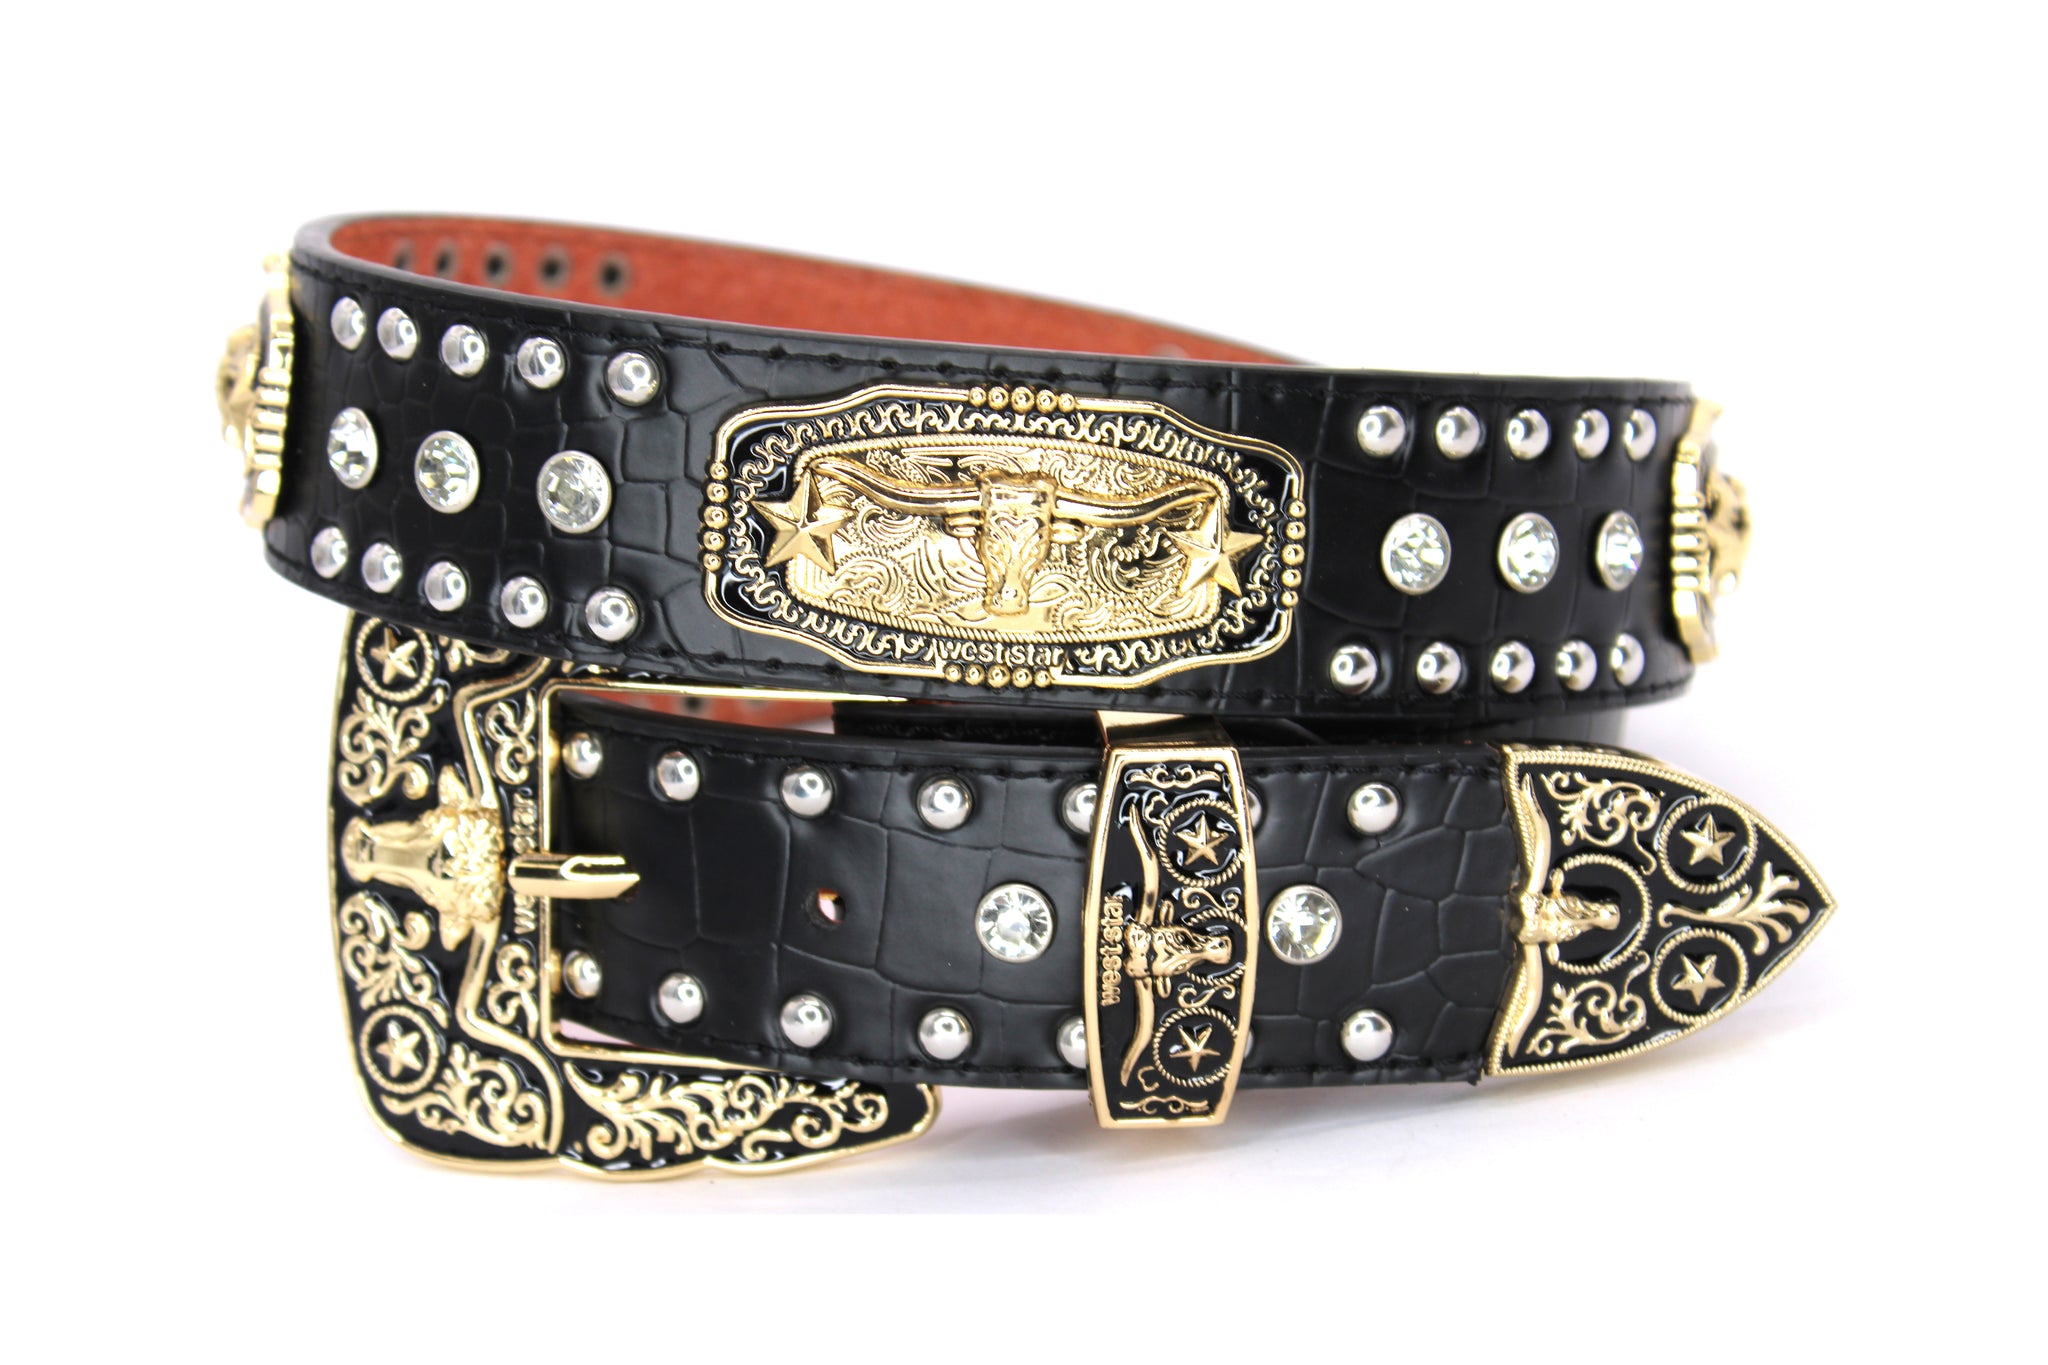 Trying to find this exact model BB Simons Belt with the